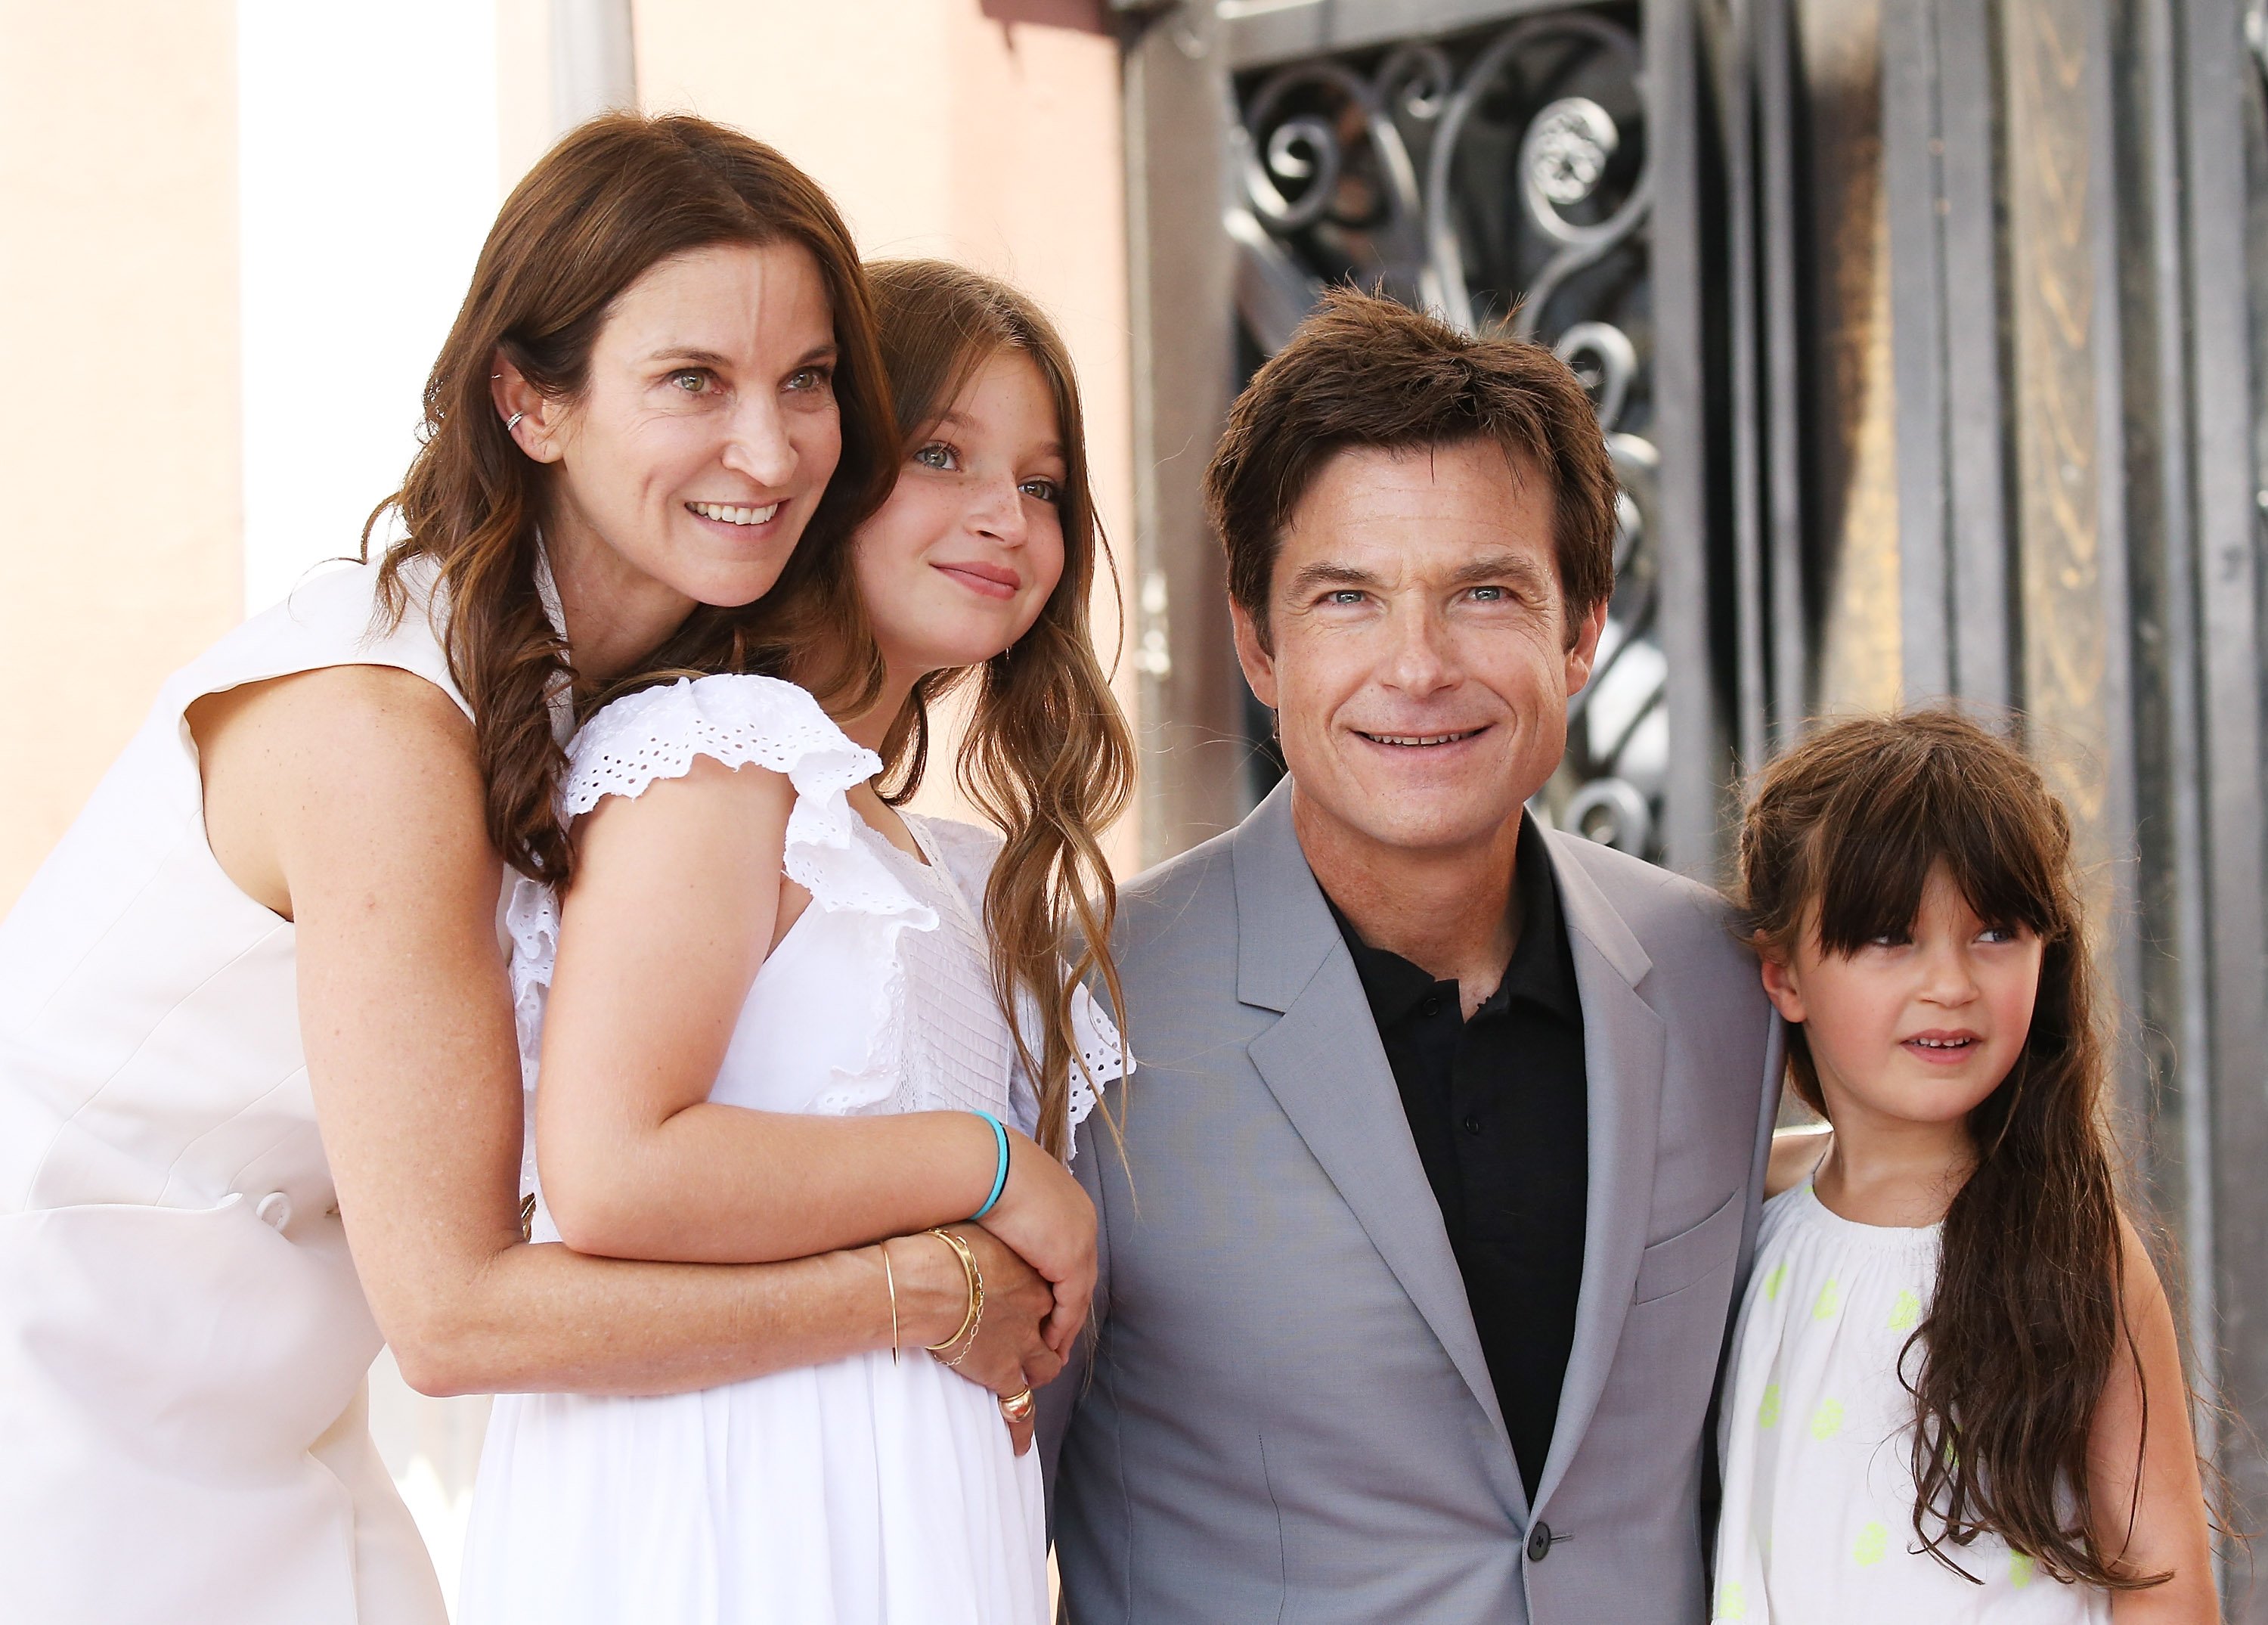 Amanda Anka with Jason Bateman and their daughters attend the Jason Bateman's Hollywood Walk of Fame honor on July 26, 2017. | Photo: Getty Images